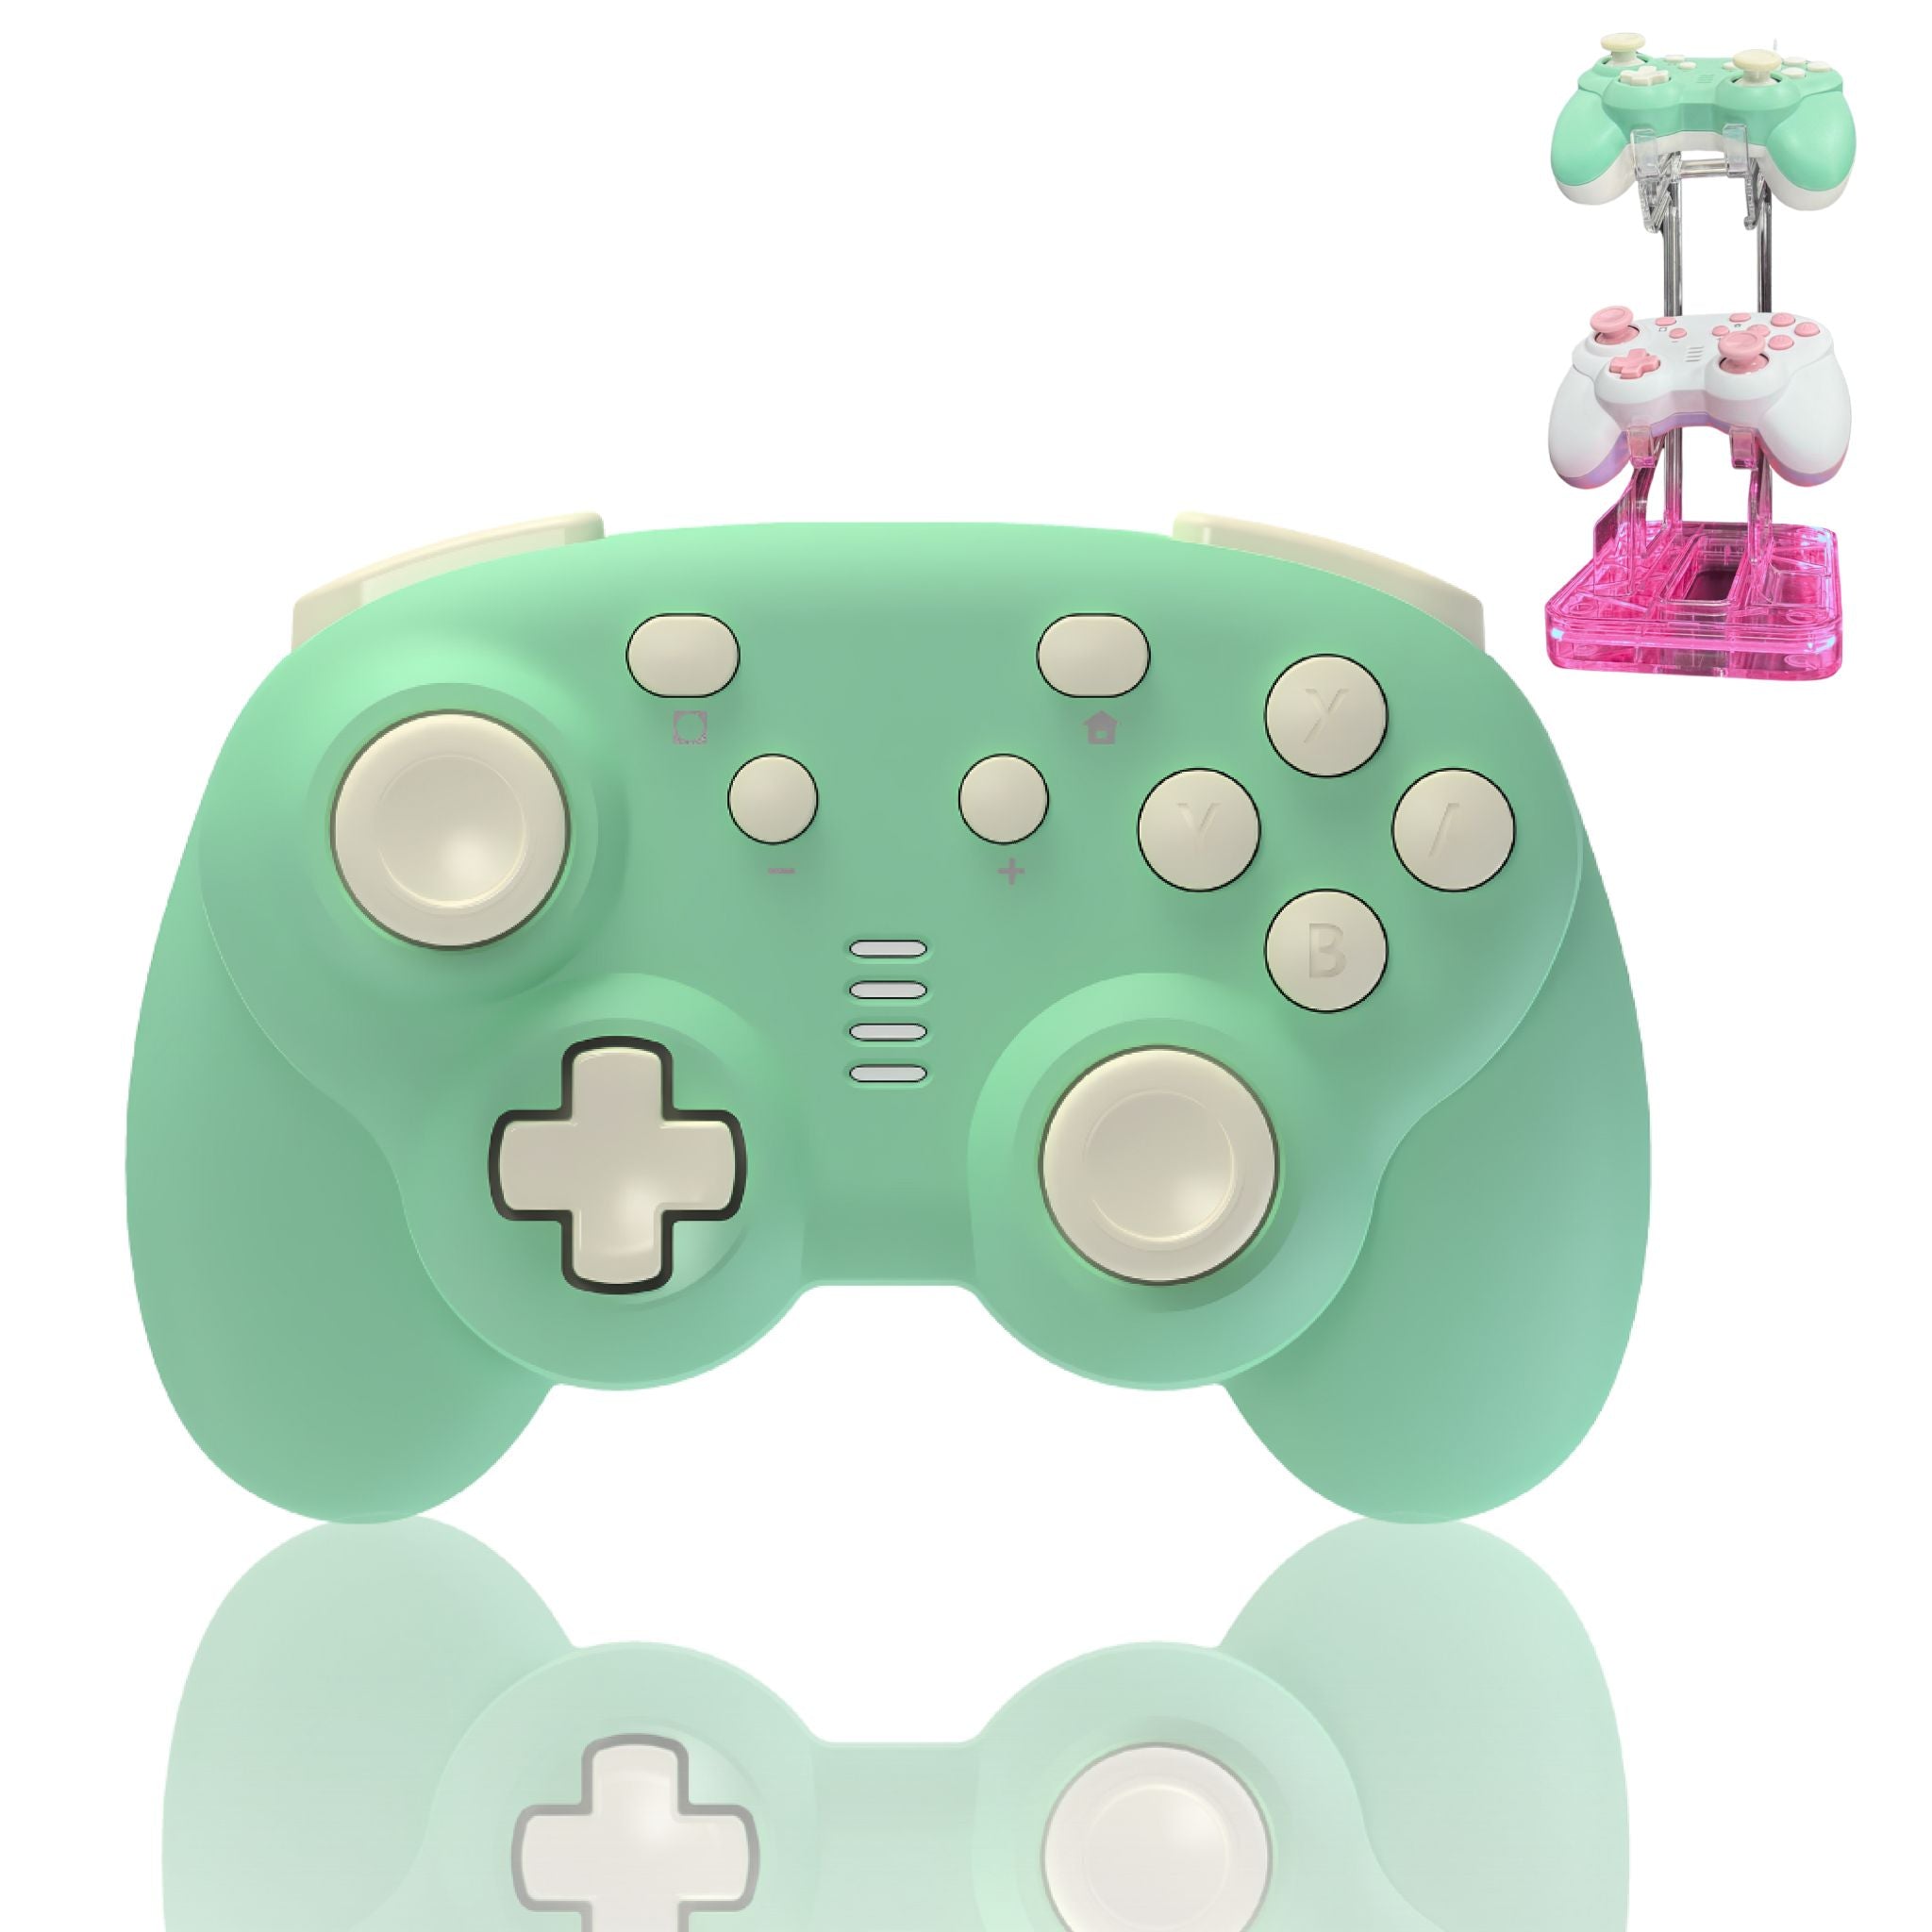 TurbX Mini Mate- Pocket Size Gaming Controller Gamepad Cloud/PC/Switch. Compact and Lightweight Design Perfectly sized for small hands & ideal for kids and adults alike, TurbX Mini Mate offering cloud gamers super portability and ease of use without sacrificing comfort. Plug & Play, w/ Nintendo Switch & PC Stream & Epic. Come with charging Stand w. Glowing Light, 6-Axis Gyro, 3D Joystick. 